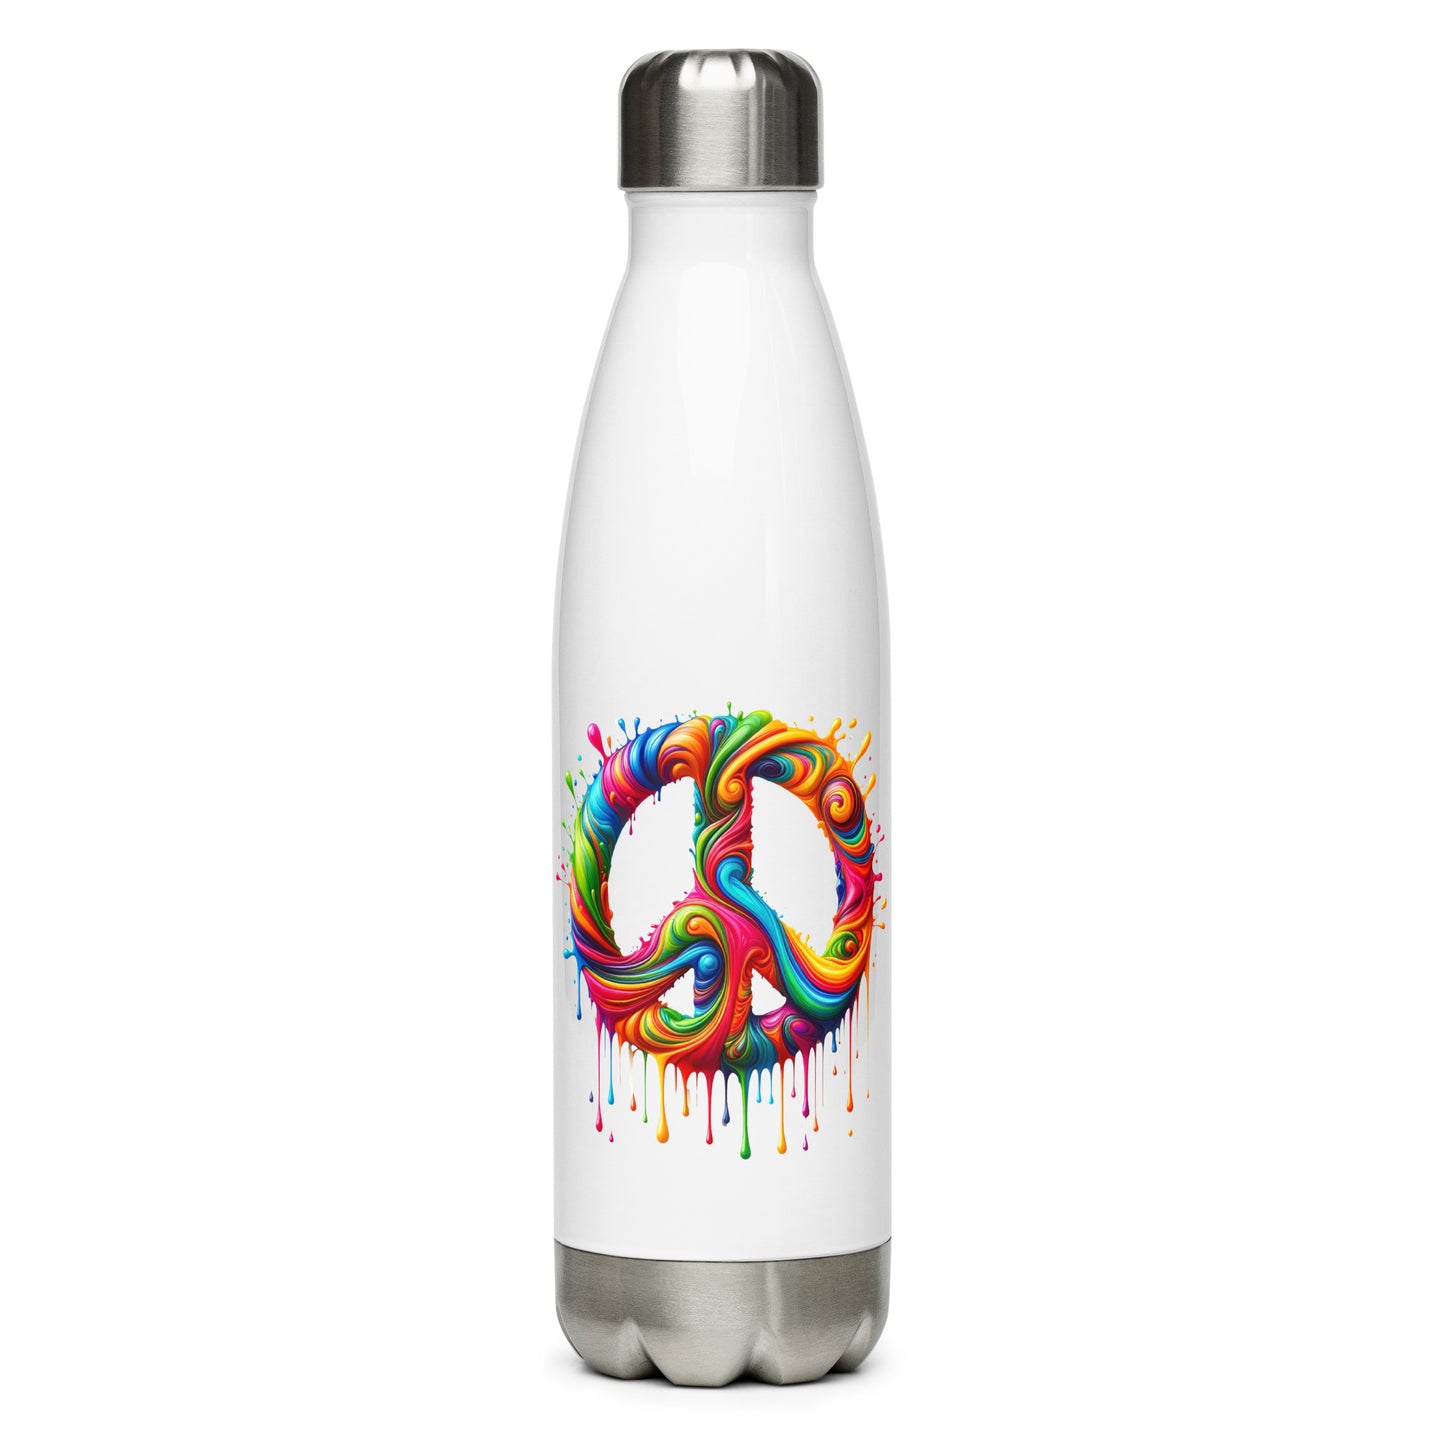 Dripping Colors of Peace Stainless steel water bottle